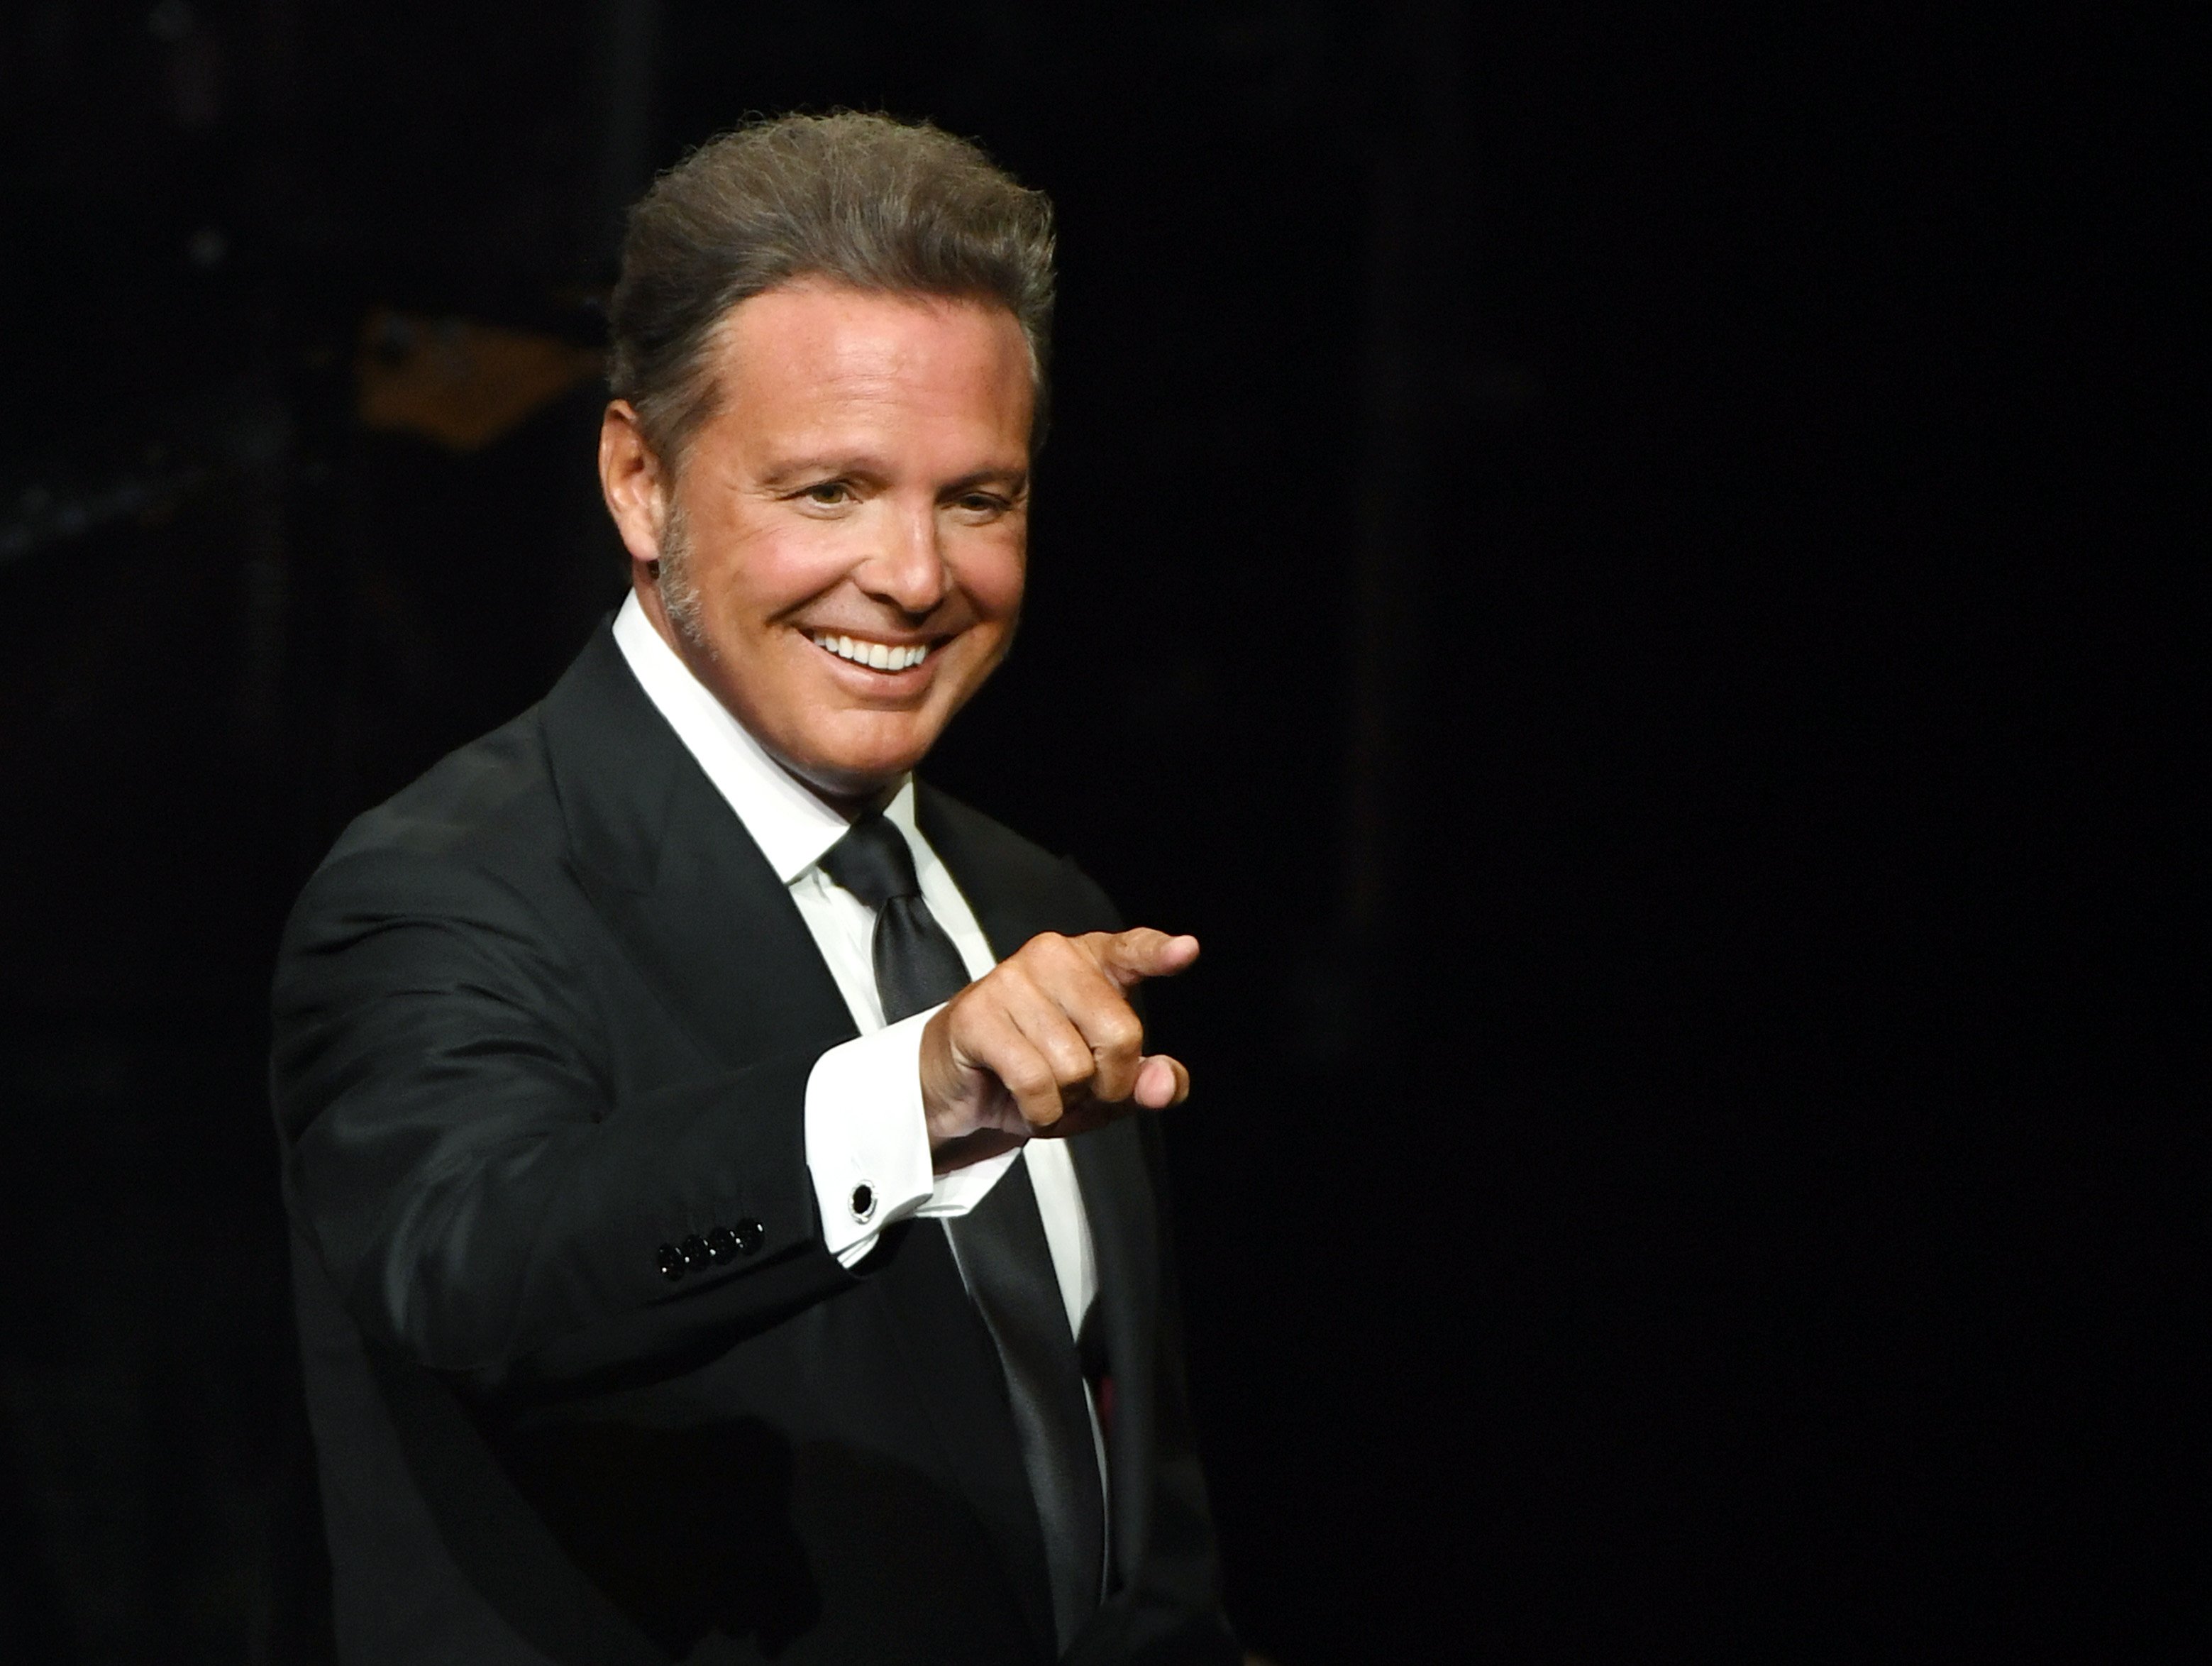  Luis Miguel performing at The Colosseum at Caesars Palace in 2019, in Las Vegas, Nevada. | Source: Getty Images